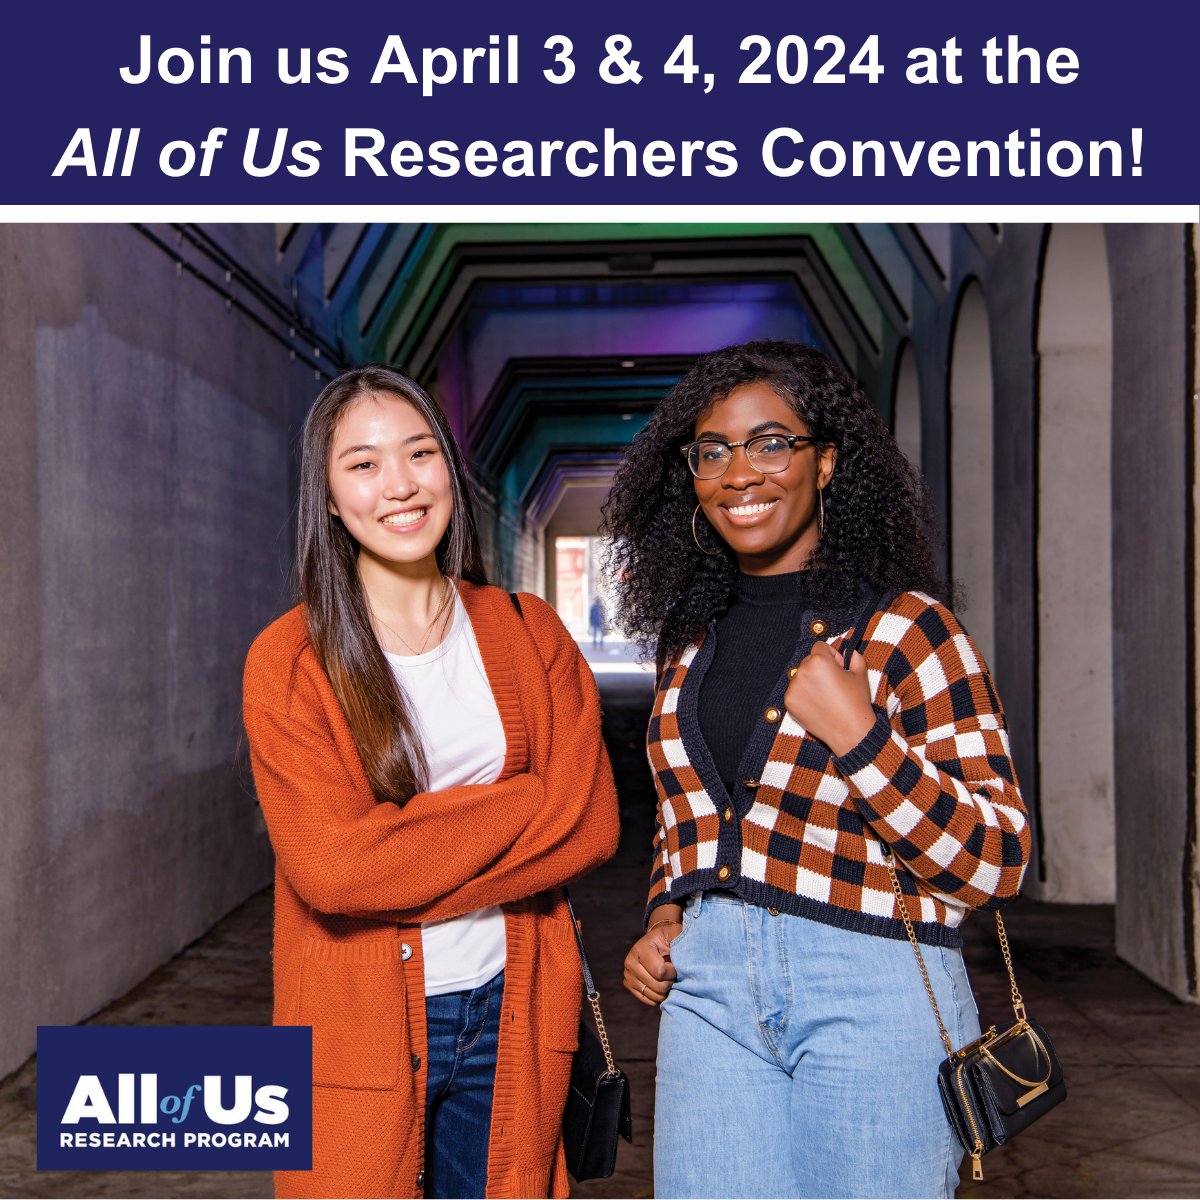 Interested in learning about the future of health research? It's not too late! Attend the free, virtual @All of Us Research Convention on April 3 and 4! Register by visiting ResearchAllofUs.org/2024Convention #AllofUsRC2024 #JoinAllofUs